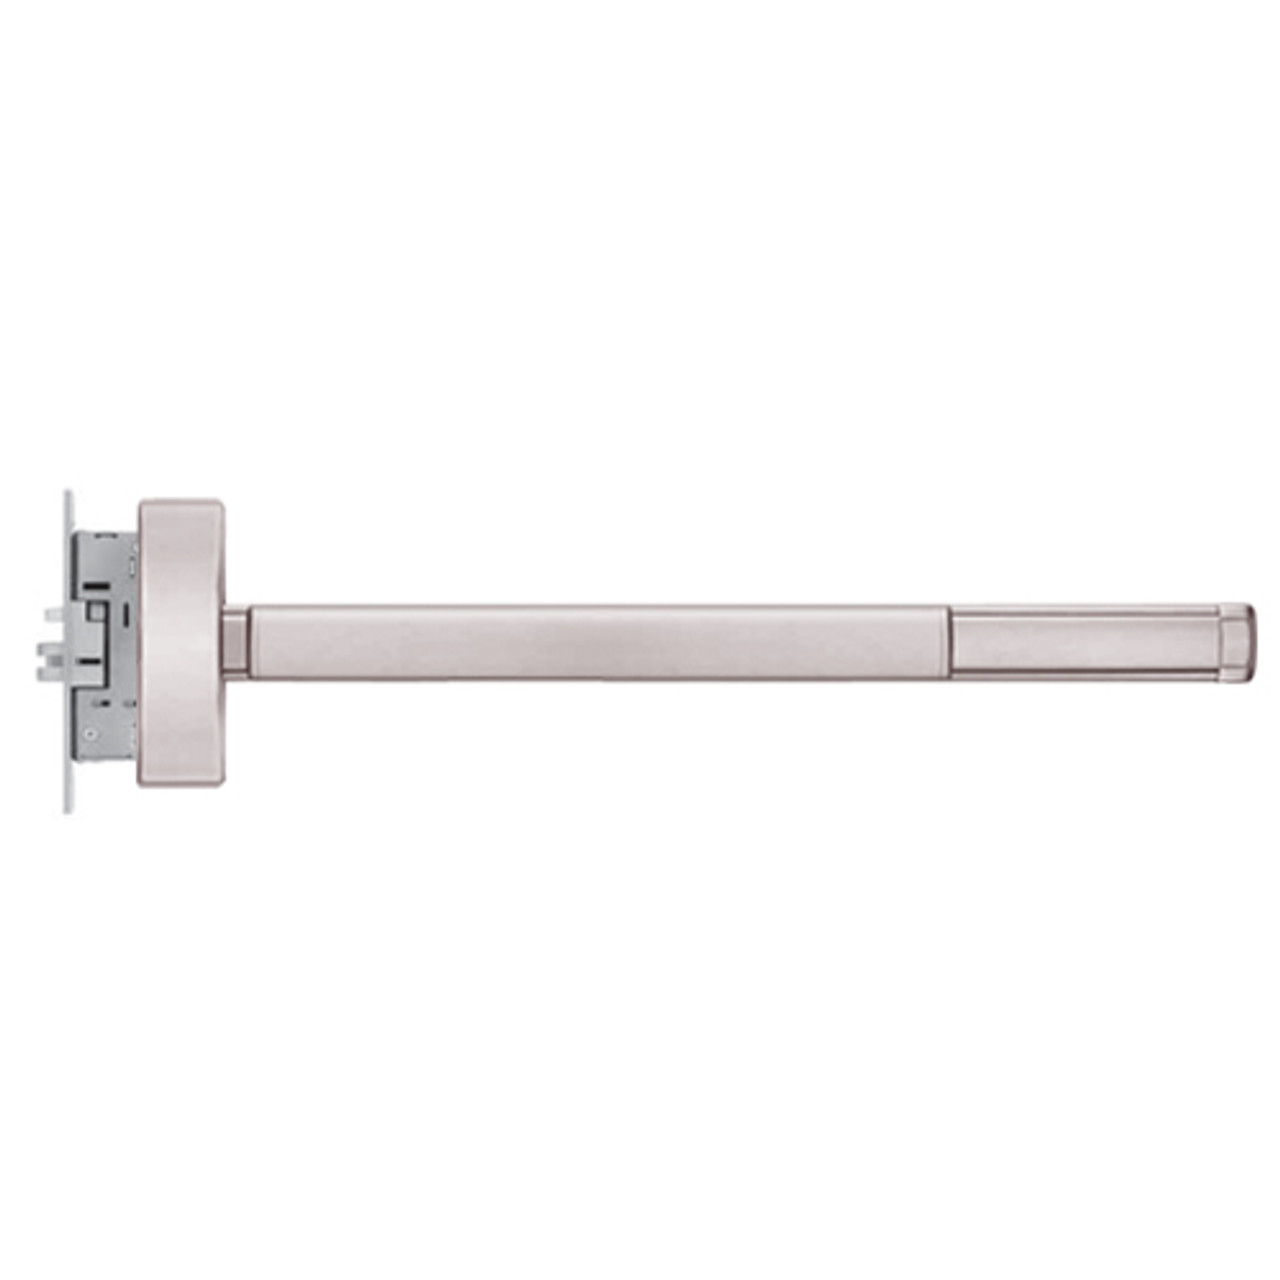 MLR2308-LHR-628-36 PHI 2300 Series Apex Mortise Exit Device with Motorized Latch Retraction Prepped for Key Controls Lever/Knob in Satin Aluminum Finish